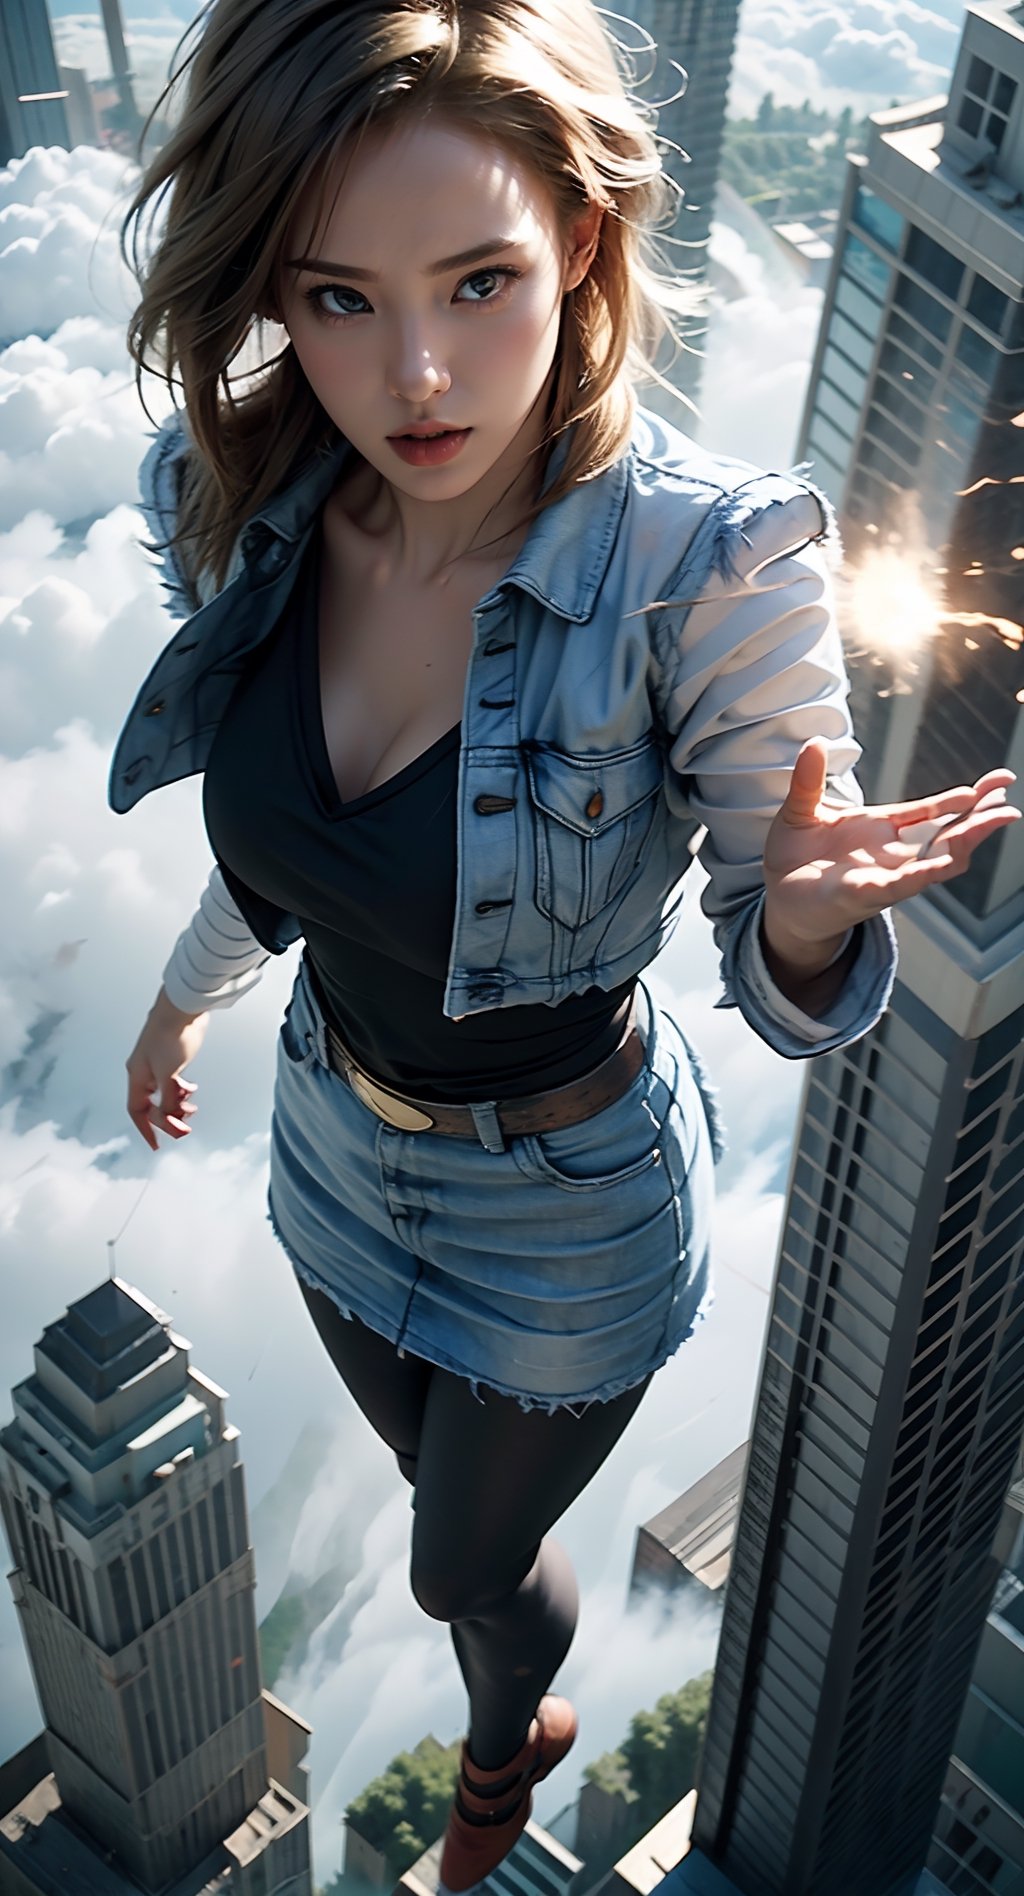 masterpiece, ultra realistic, 8K, Android_18_DB, full body, denim skirt, pantyhose, face focus, blond hair, look afar, top-down view,no gravity, she is weightlessness and flying through the buildings, cityscape, cloudy, superwoman position,lighting rings,(a big thunder ball between hands),cloudy,